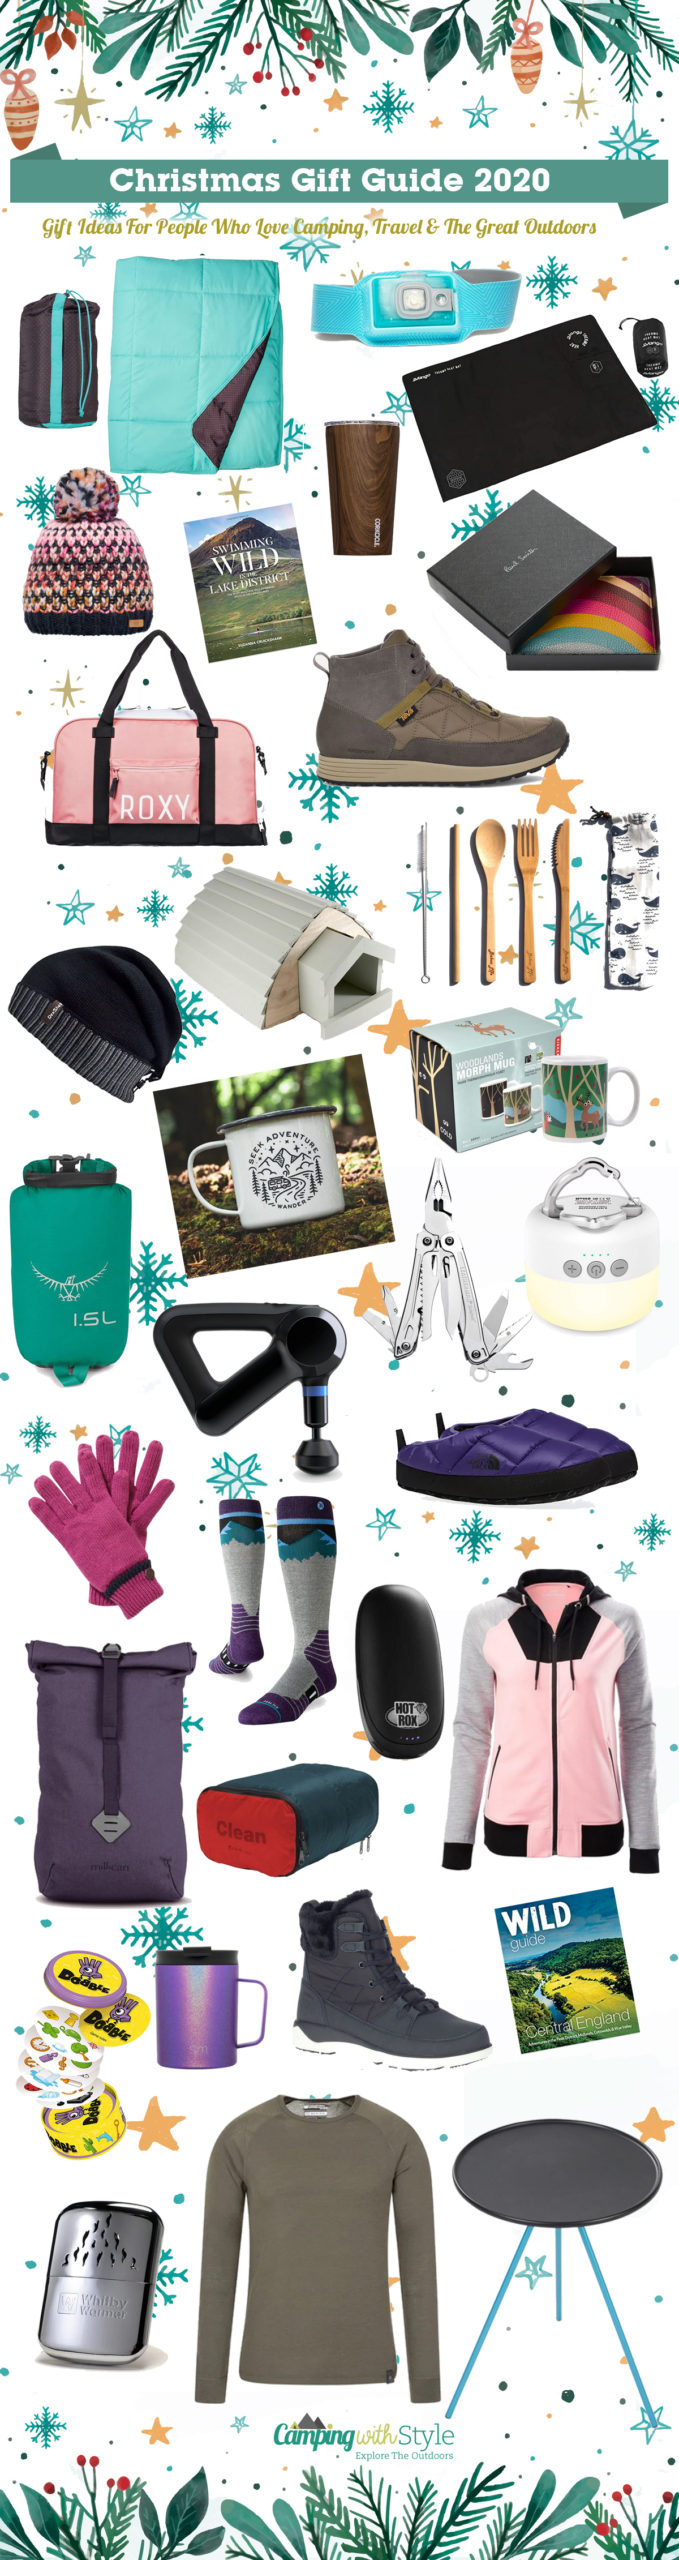 Christmas gift guide camping, travel and outdoors gift ideas Christmas 2020